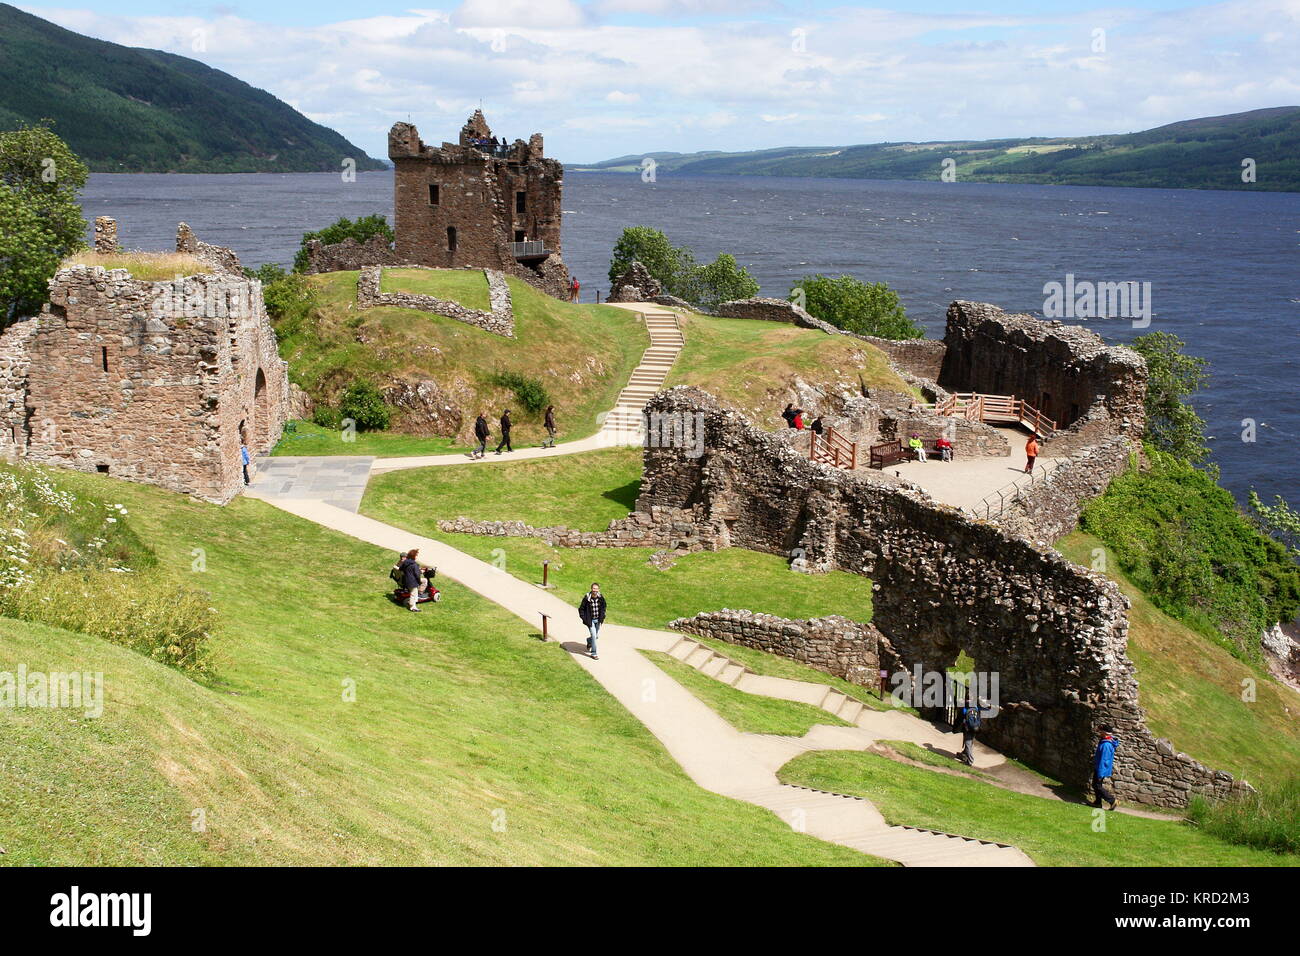 View of the ruins of Dunollie Castle, on a hill just north of Oban, on the west coast of Scotland.  The building dates from the 15th century, and is linked to the Clan MacDougall.     Date: 2010 Stock Photo